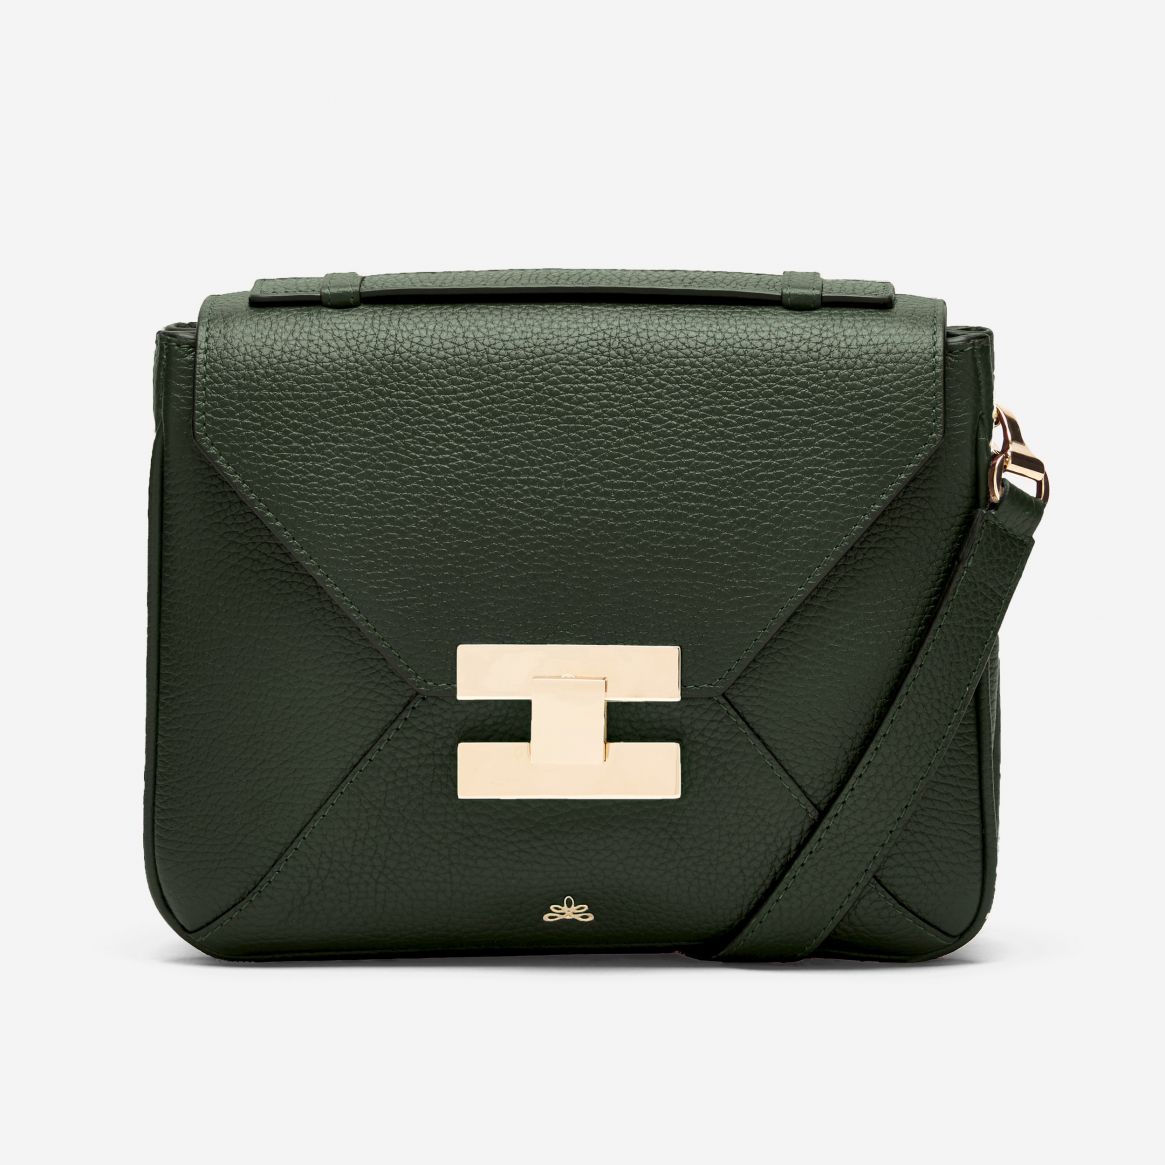 My latest crush for quality leather bags: DeMellier London. This Mini Berlin bag is perfect for running errands or going out. Details at une femme d'un certain age.